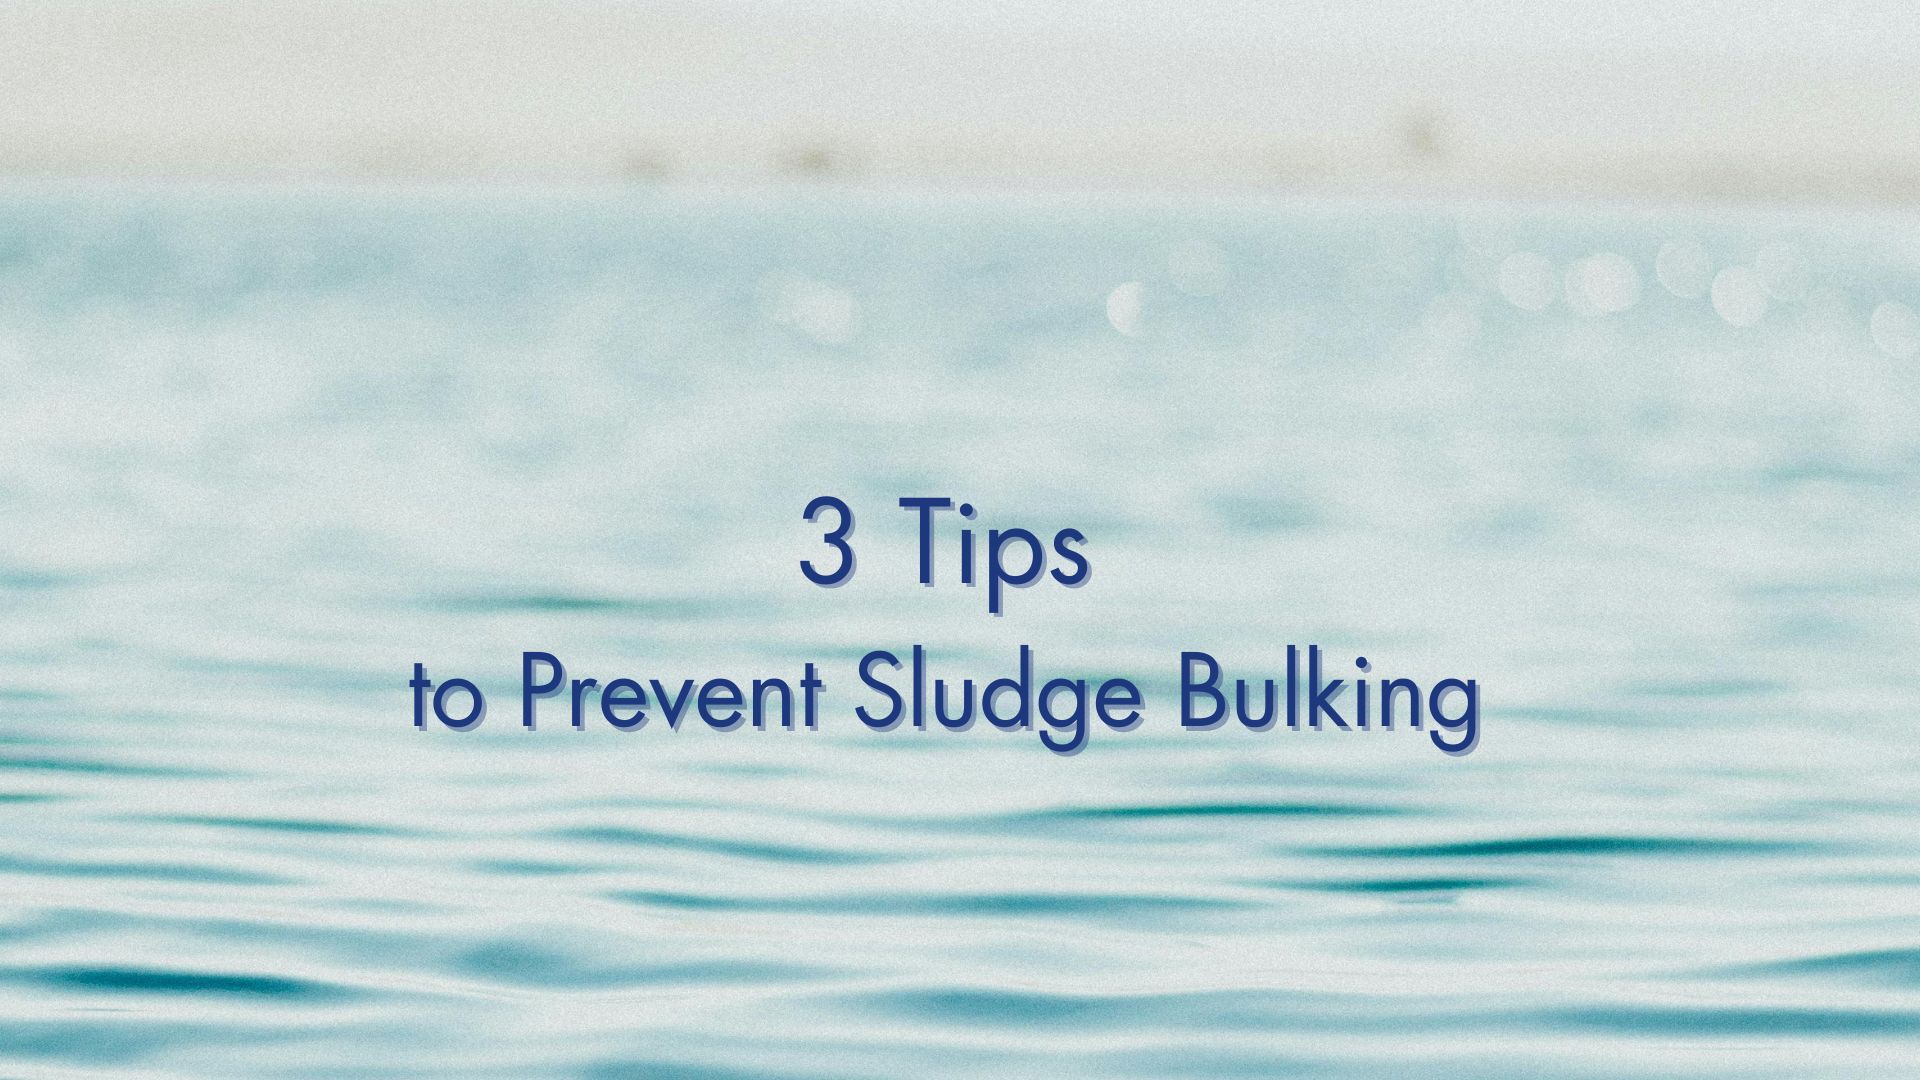 3 Tips to Prevent Sludge Bulking in Your Wastewater Treatment System